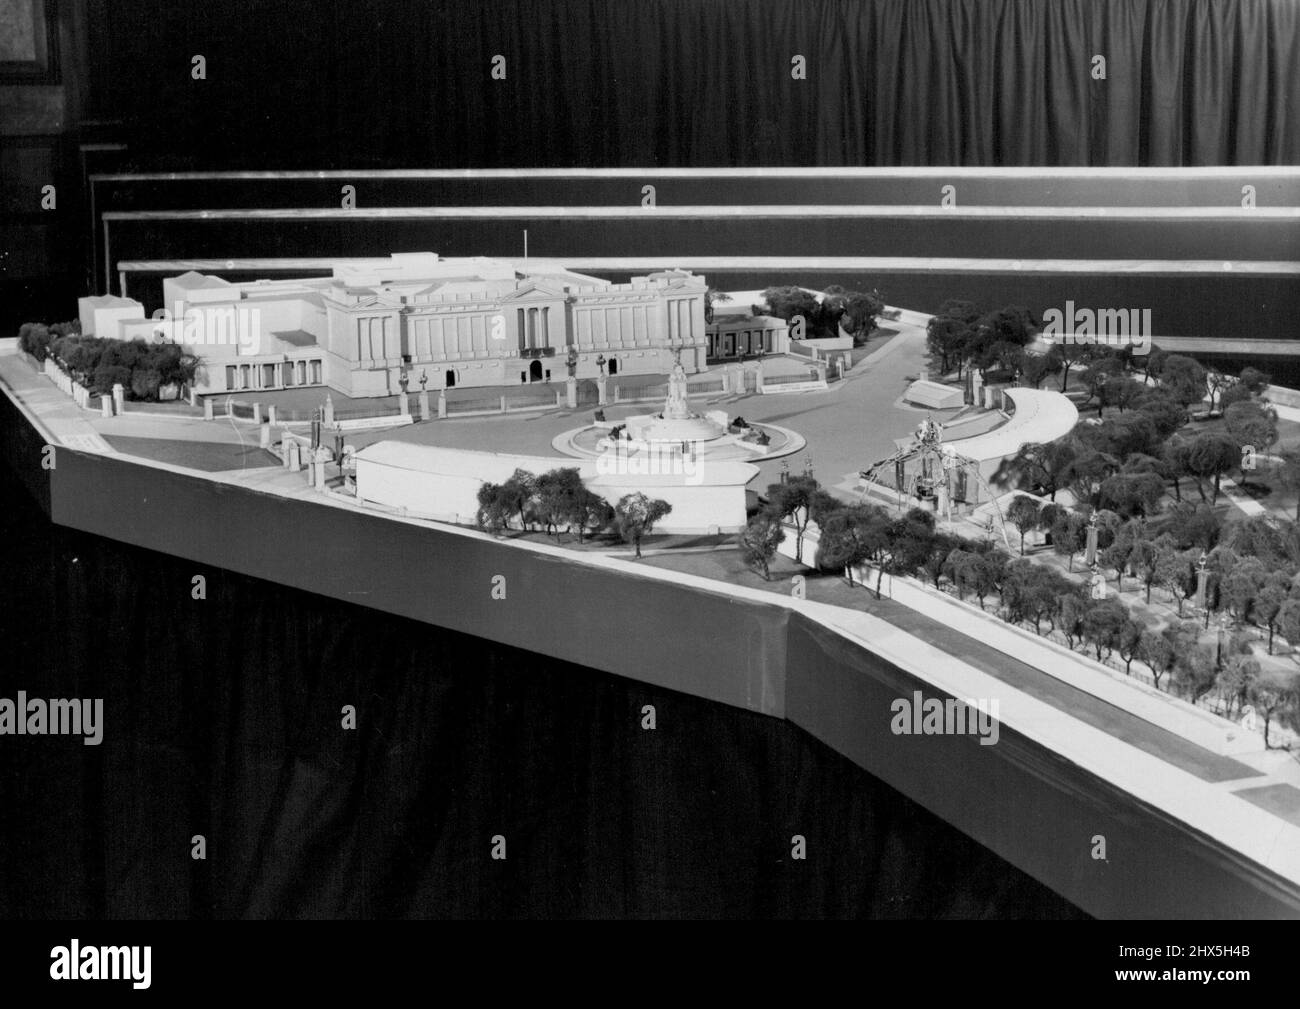 Models of The Coronation Route on View. Model of a general view of Buckingham Palace, showing the Stands erected. The Mall is on the right. A Conference was held this morning at Church House Assembly Hall, Westminster, when the Minister of Works, the Rt. Hon. David Eccles, M.P., gave details of the scheme for decoration of the Coronation route, for which the Ministry of Works is responsible. A number of models and drawing were on view. February 17, 1953. (Photo by Fox Photos). Stock Photo